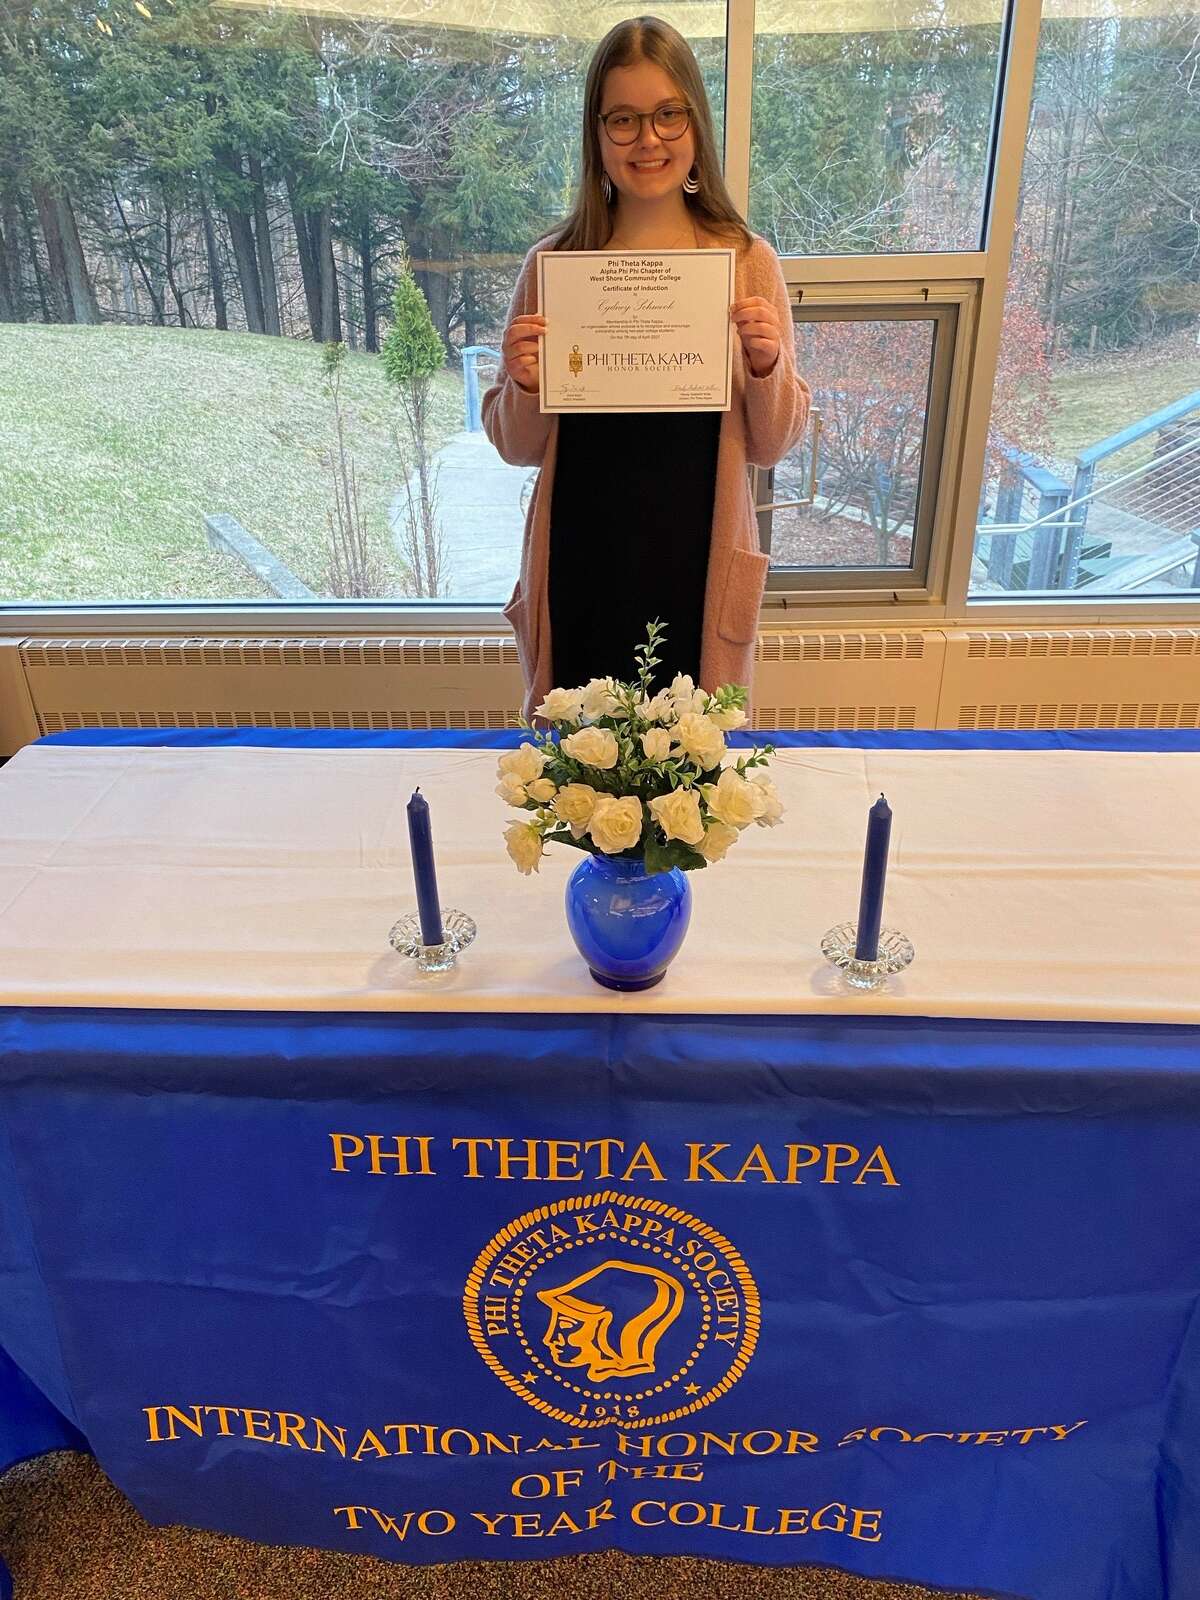 Pictured is Cydney Schmock, a recent inductee into West Shore Community College's chapter of Phi Theta Kappa.